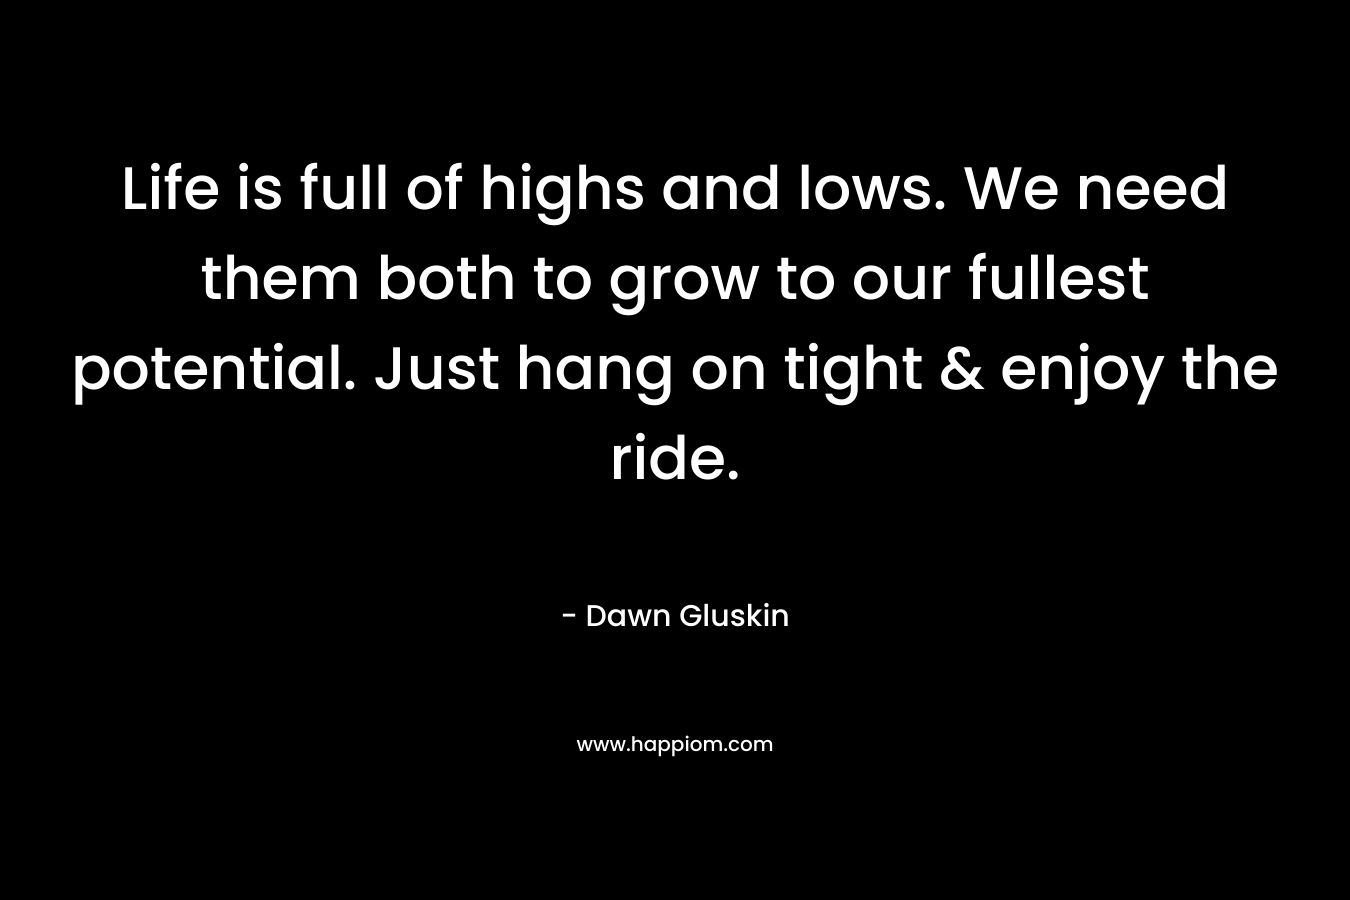 Life is full of highs and lows. We need them both to grow to our fullest potential. Just hang on tight & enjoy the ride. – Dawn Gluskin